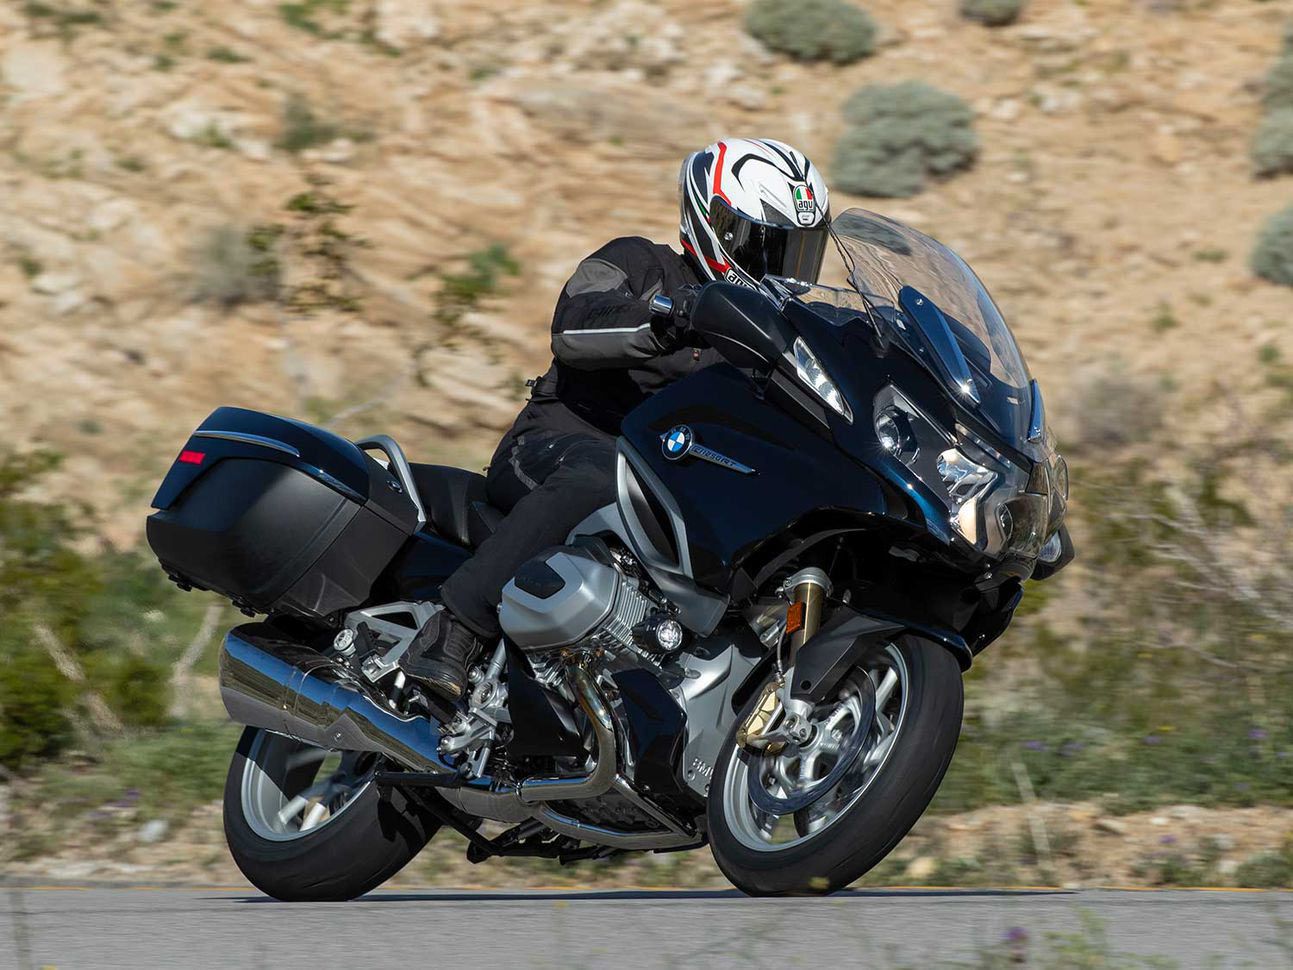 Follow our tips and you’ll avoid a lot of pitfalls when buying a motorcycle online.